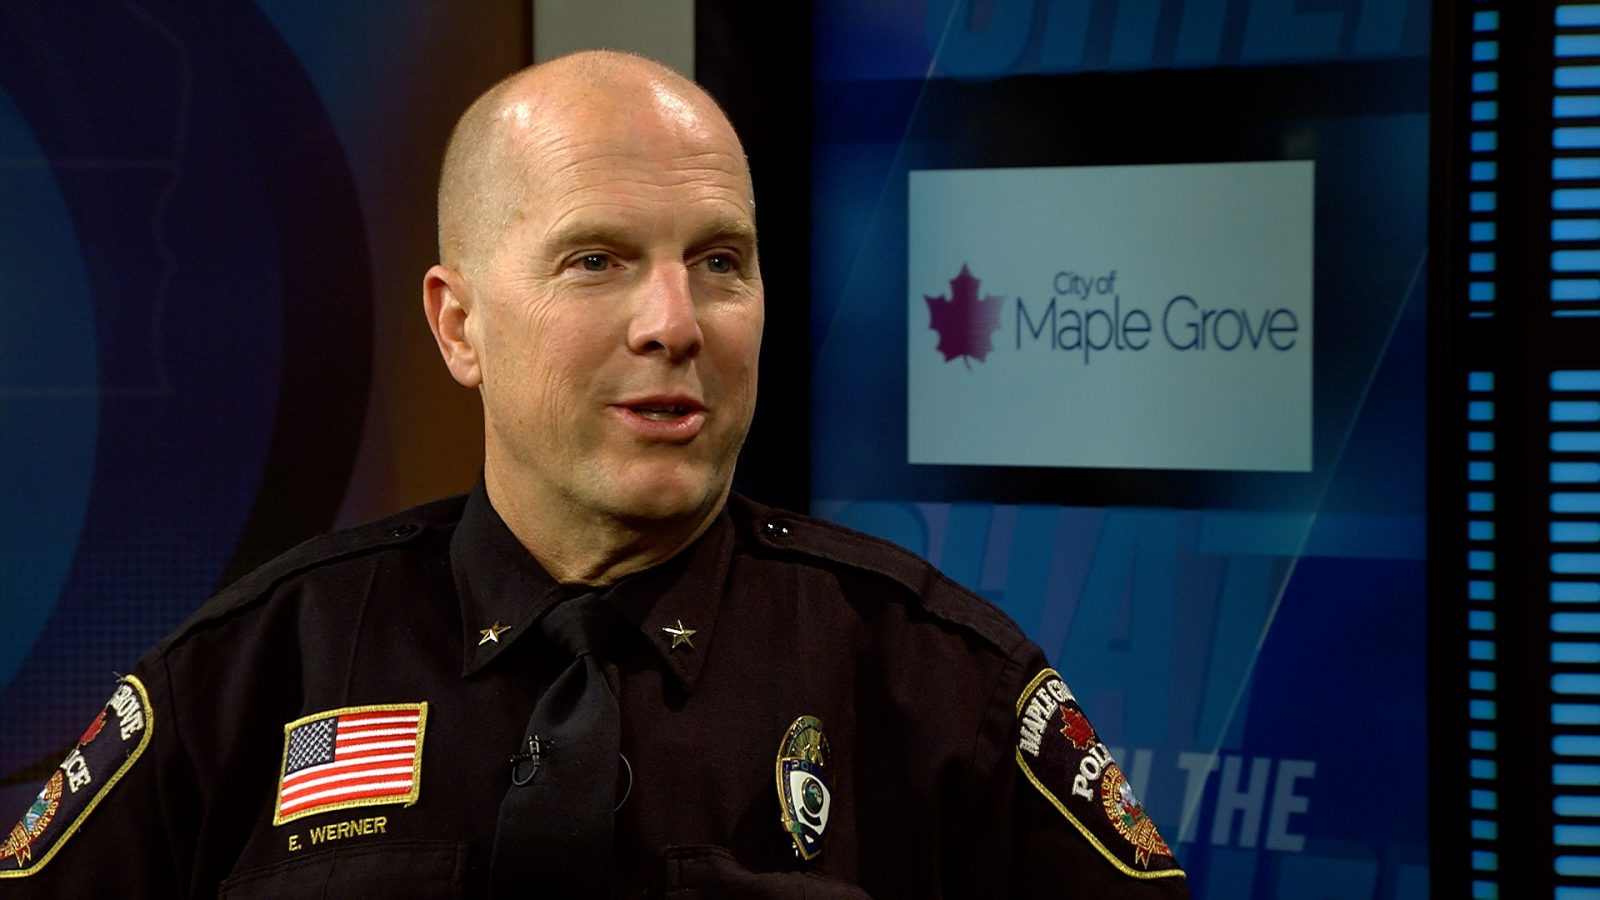 Maple Grove Chief Eric Werner